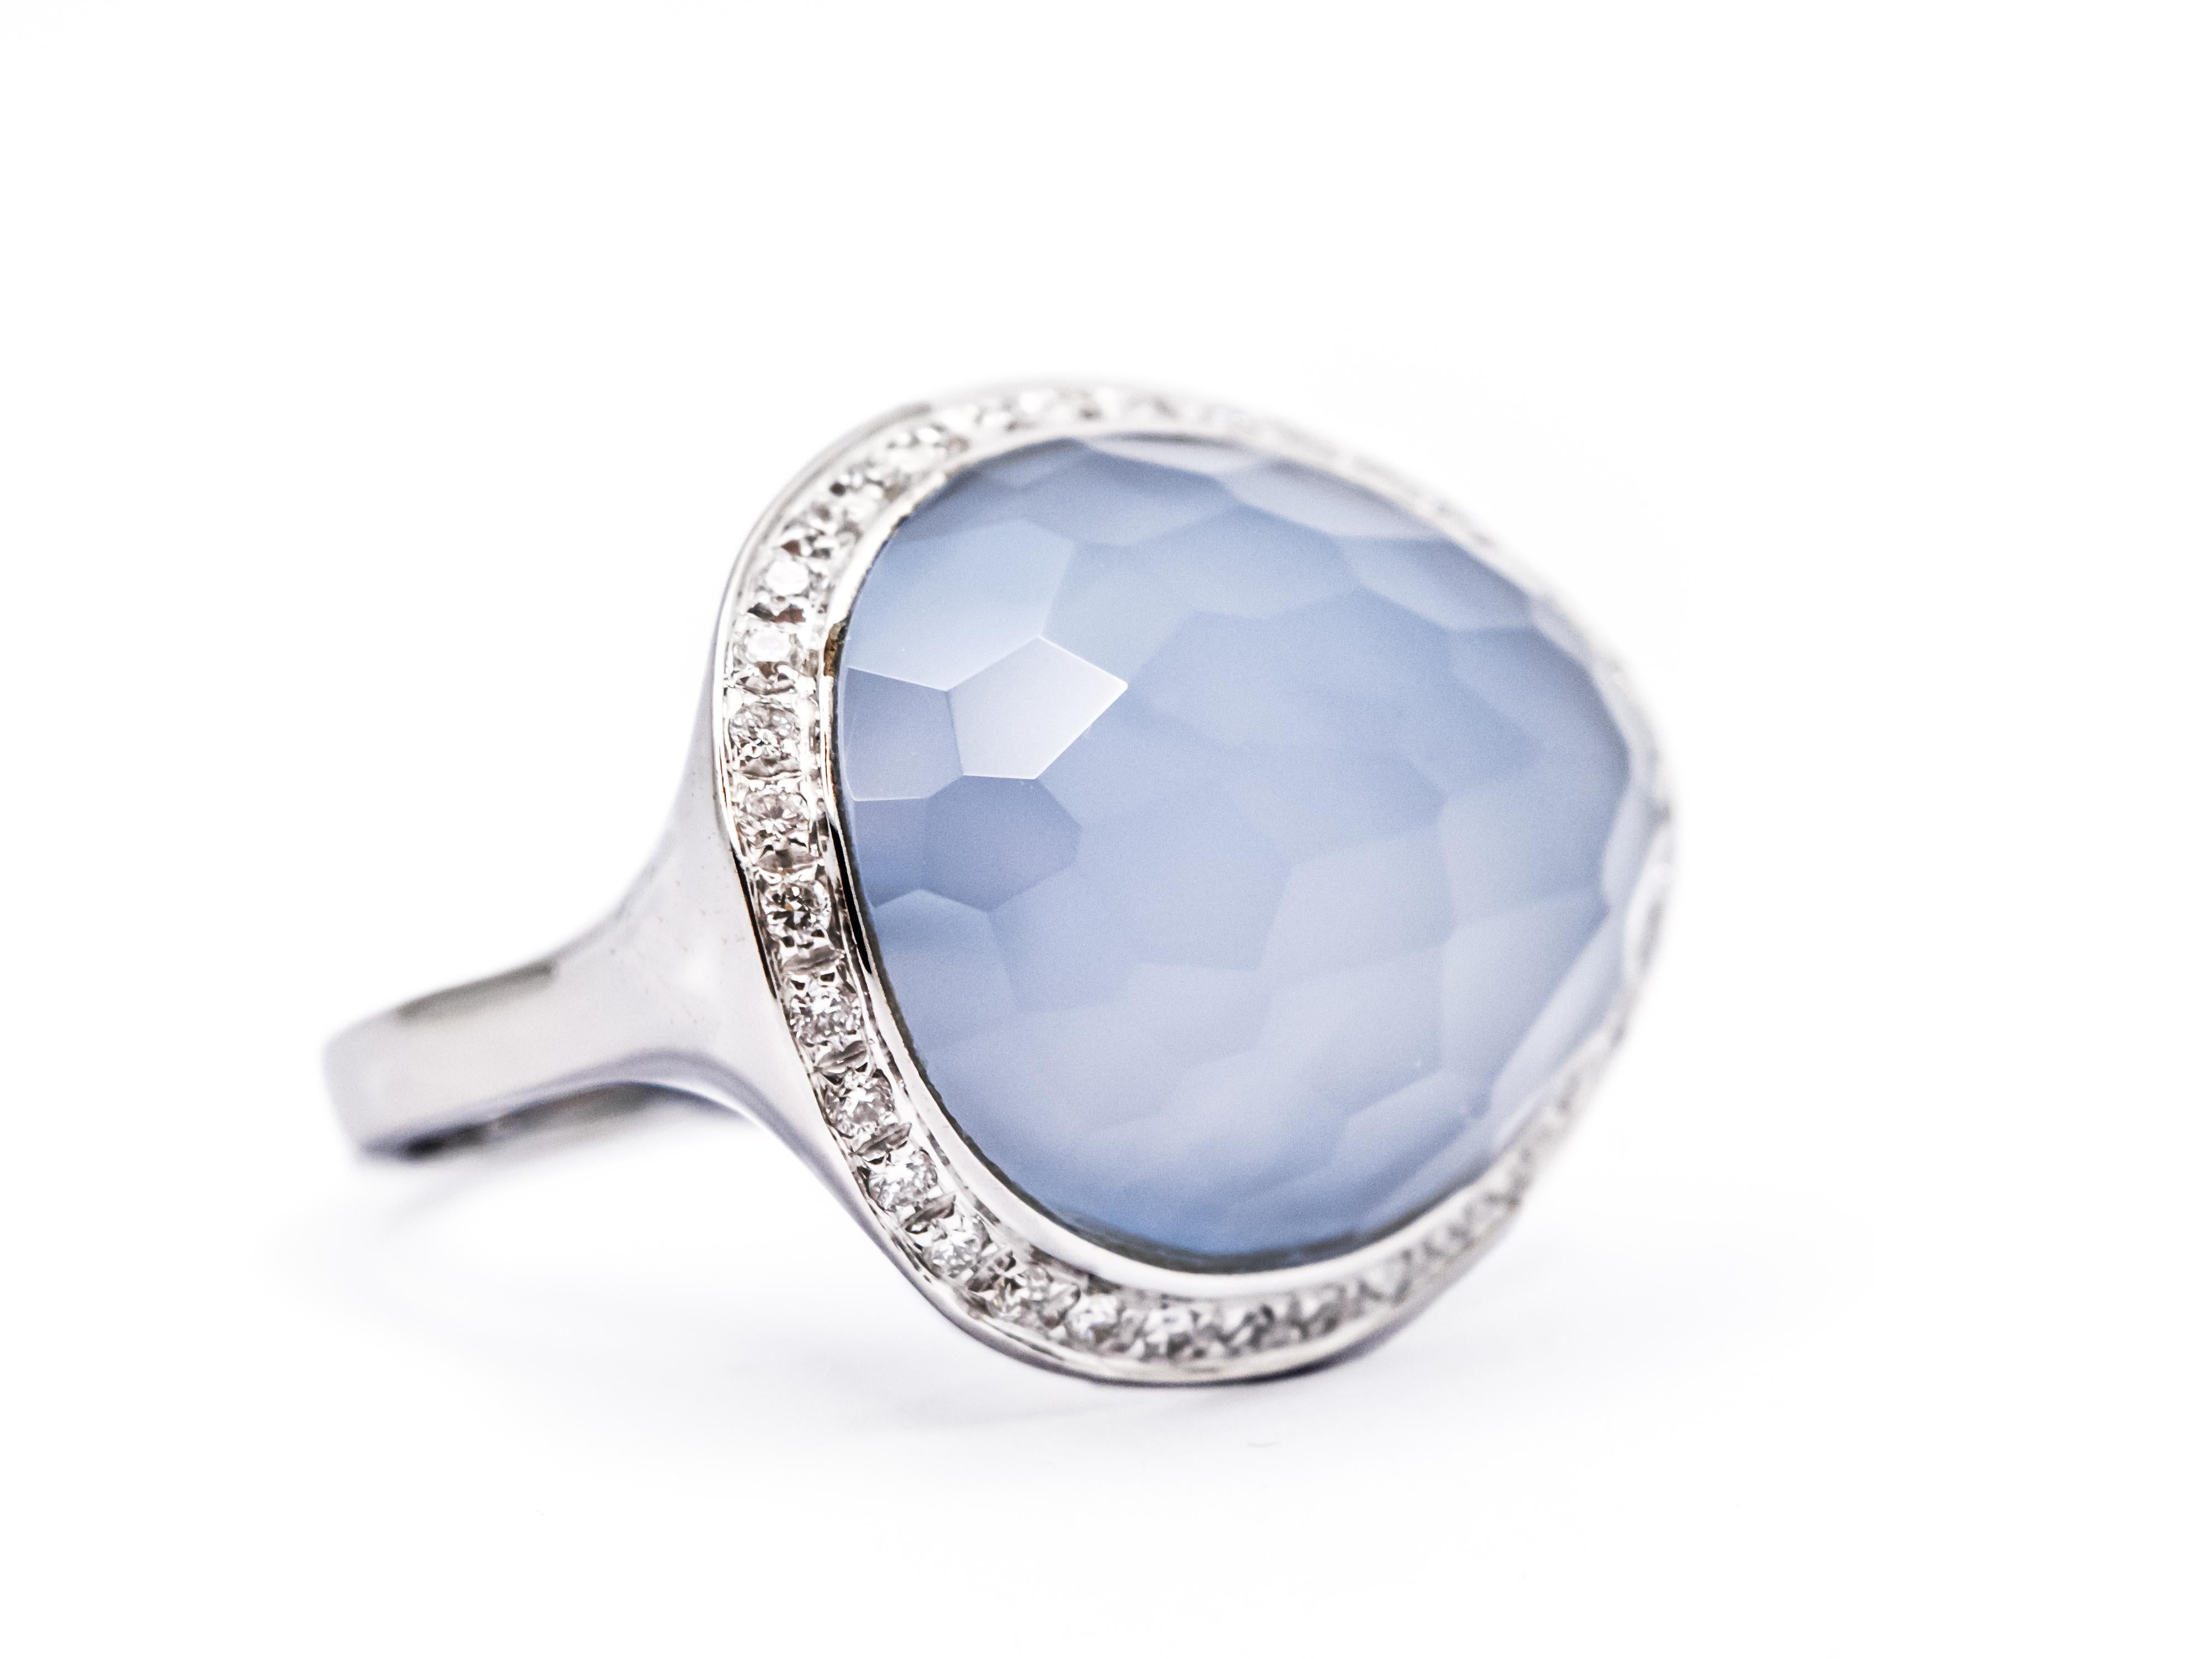 A beautiful ring with an imposting size. The top measures approximately 2cm x 2.4cm.
This ring is constructed of 18 kt white gold with a total weight of 13.15 grams. The chalcedony has a domed shape and a briolet cut and is surrounded by a frame of